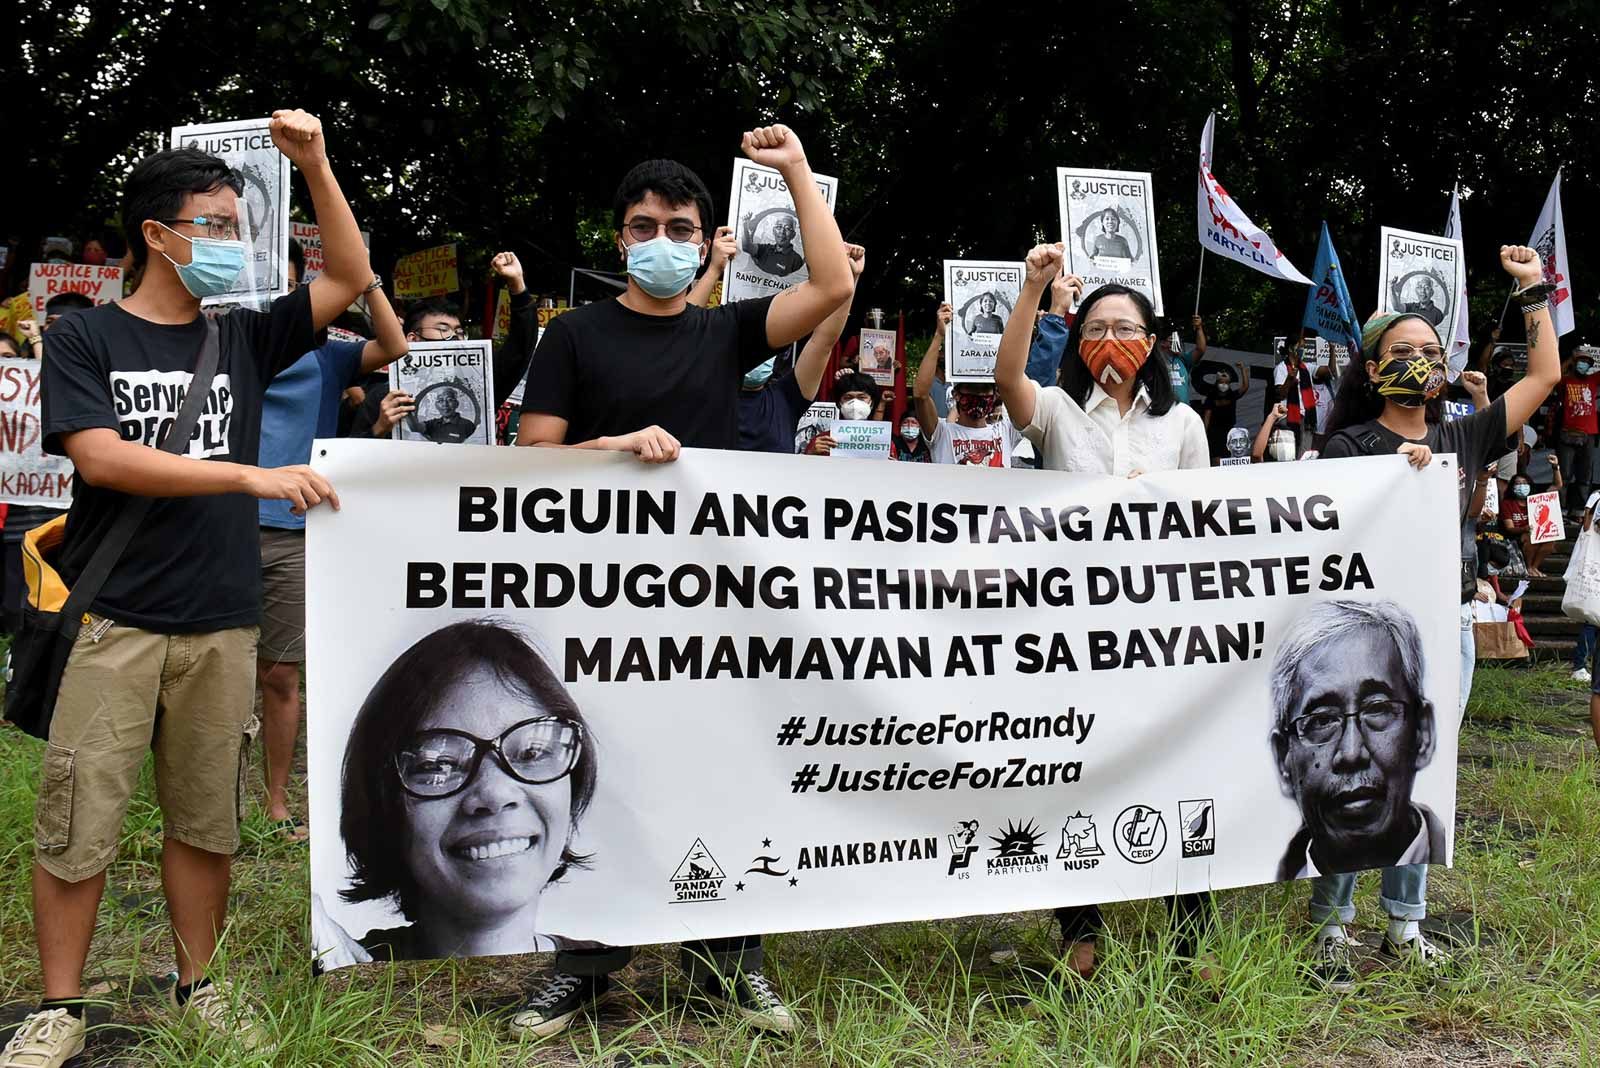 UN rights office calls for independent probe into killings of human rights defenders in PH